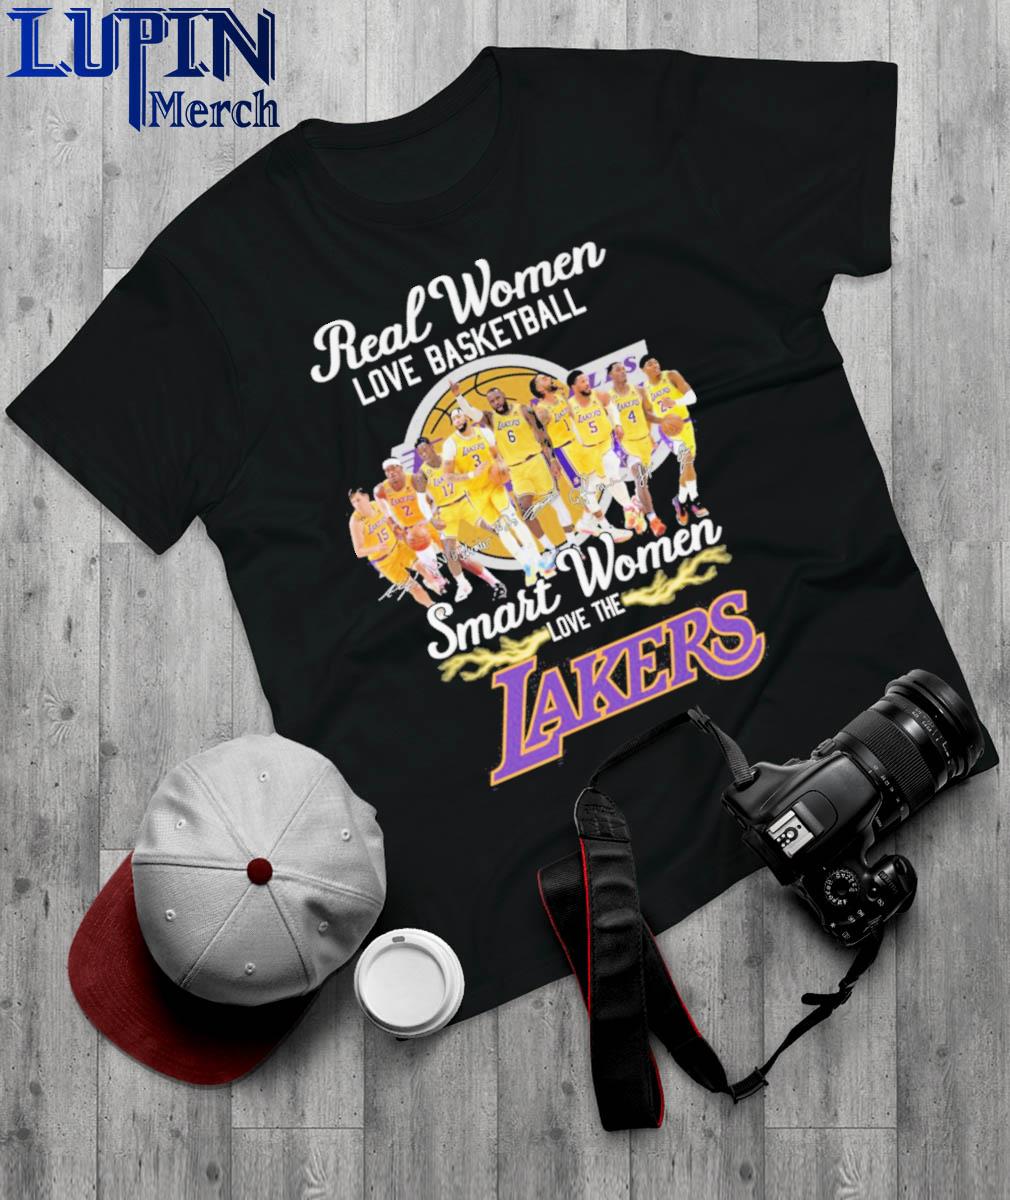 Real women love basketball smart women love The Lakers 2023 new